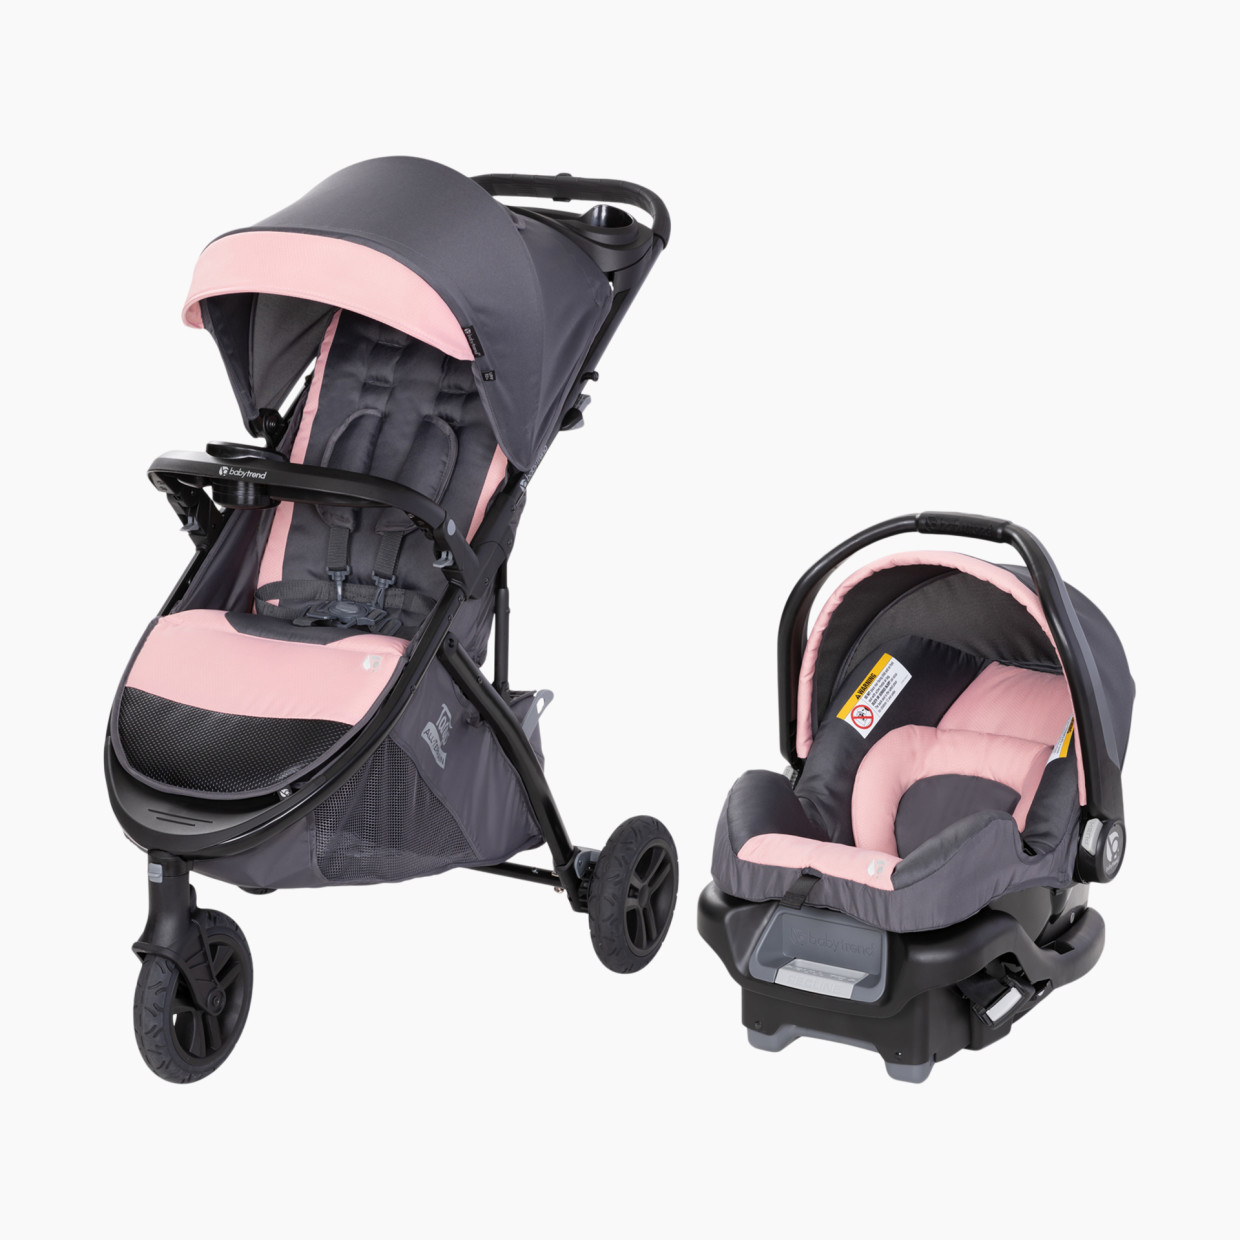 Baby Trend Tango 3 All-Terrain Travel System - Ultra Pink.